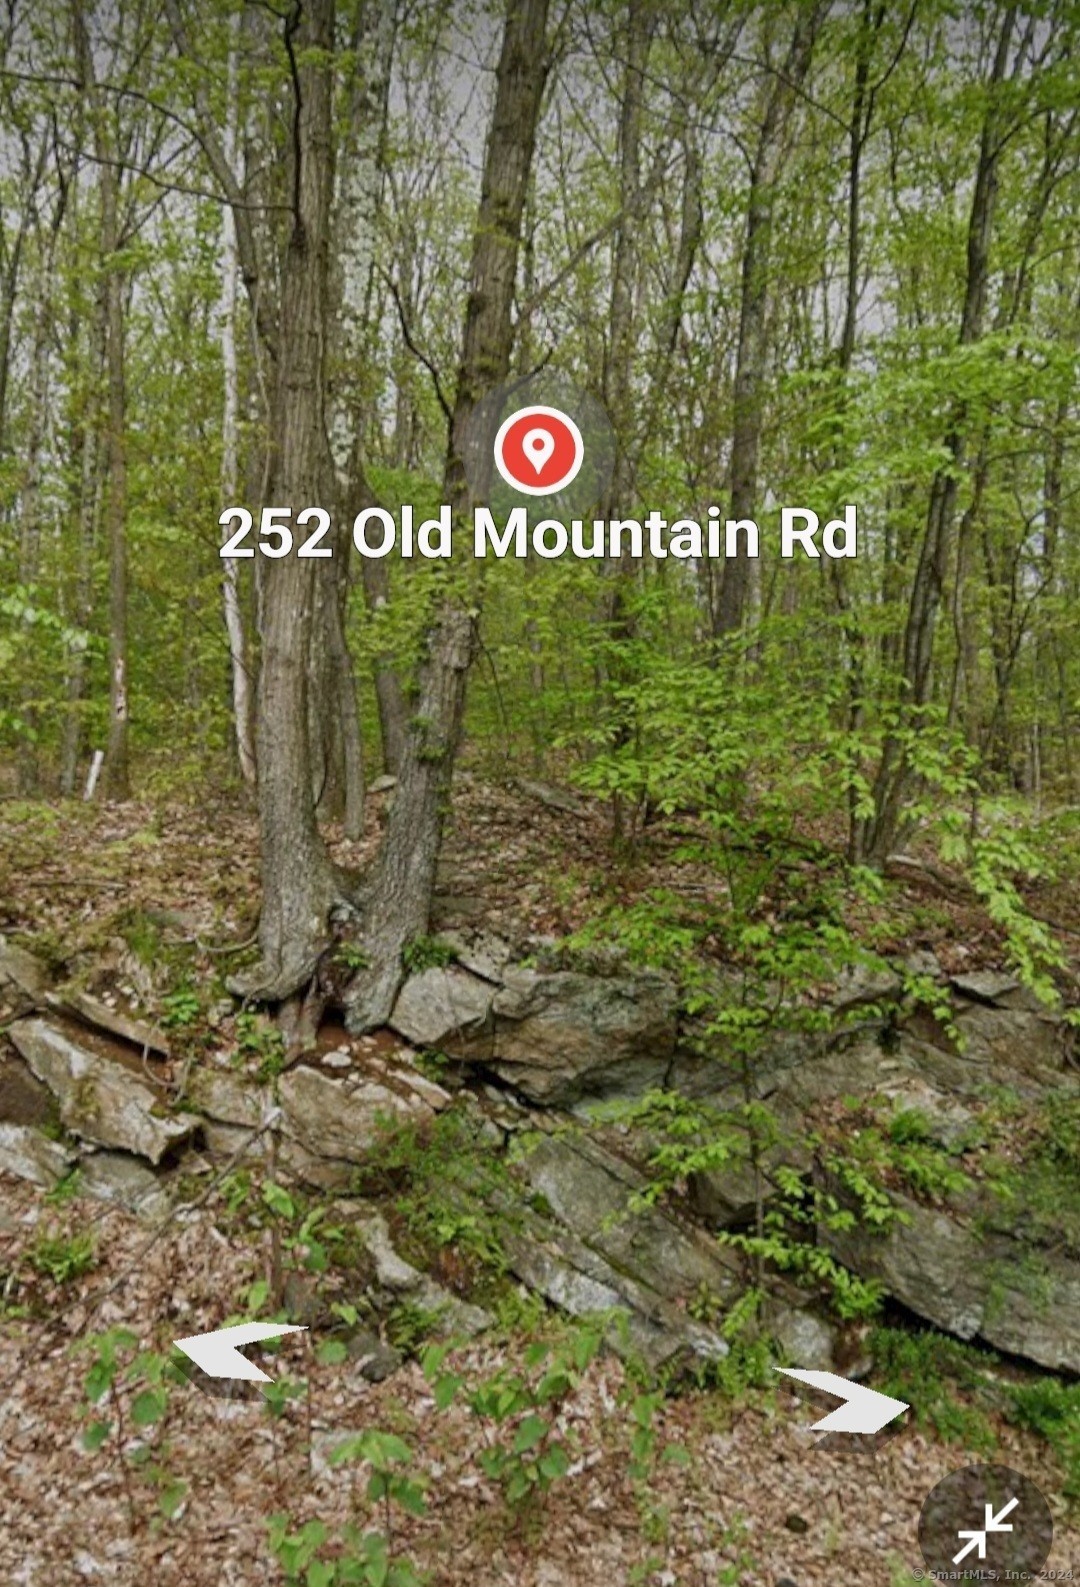 1. 252 Old Mountain Road